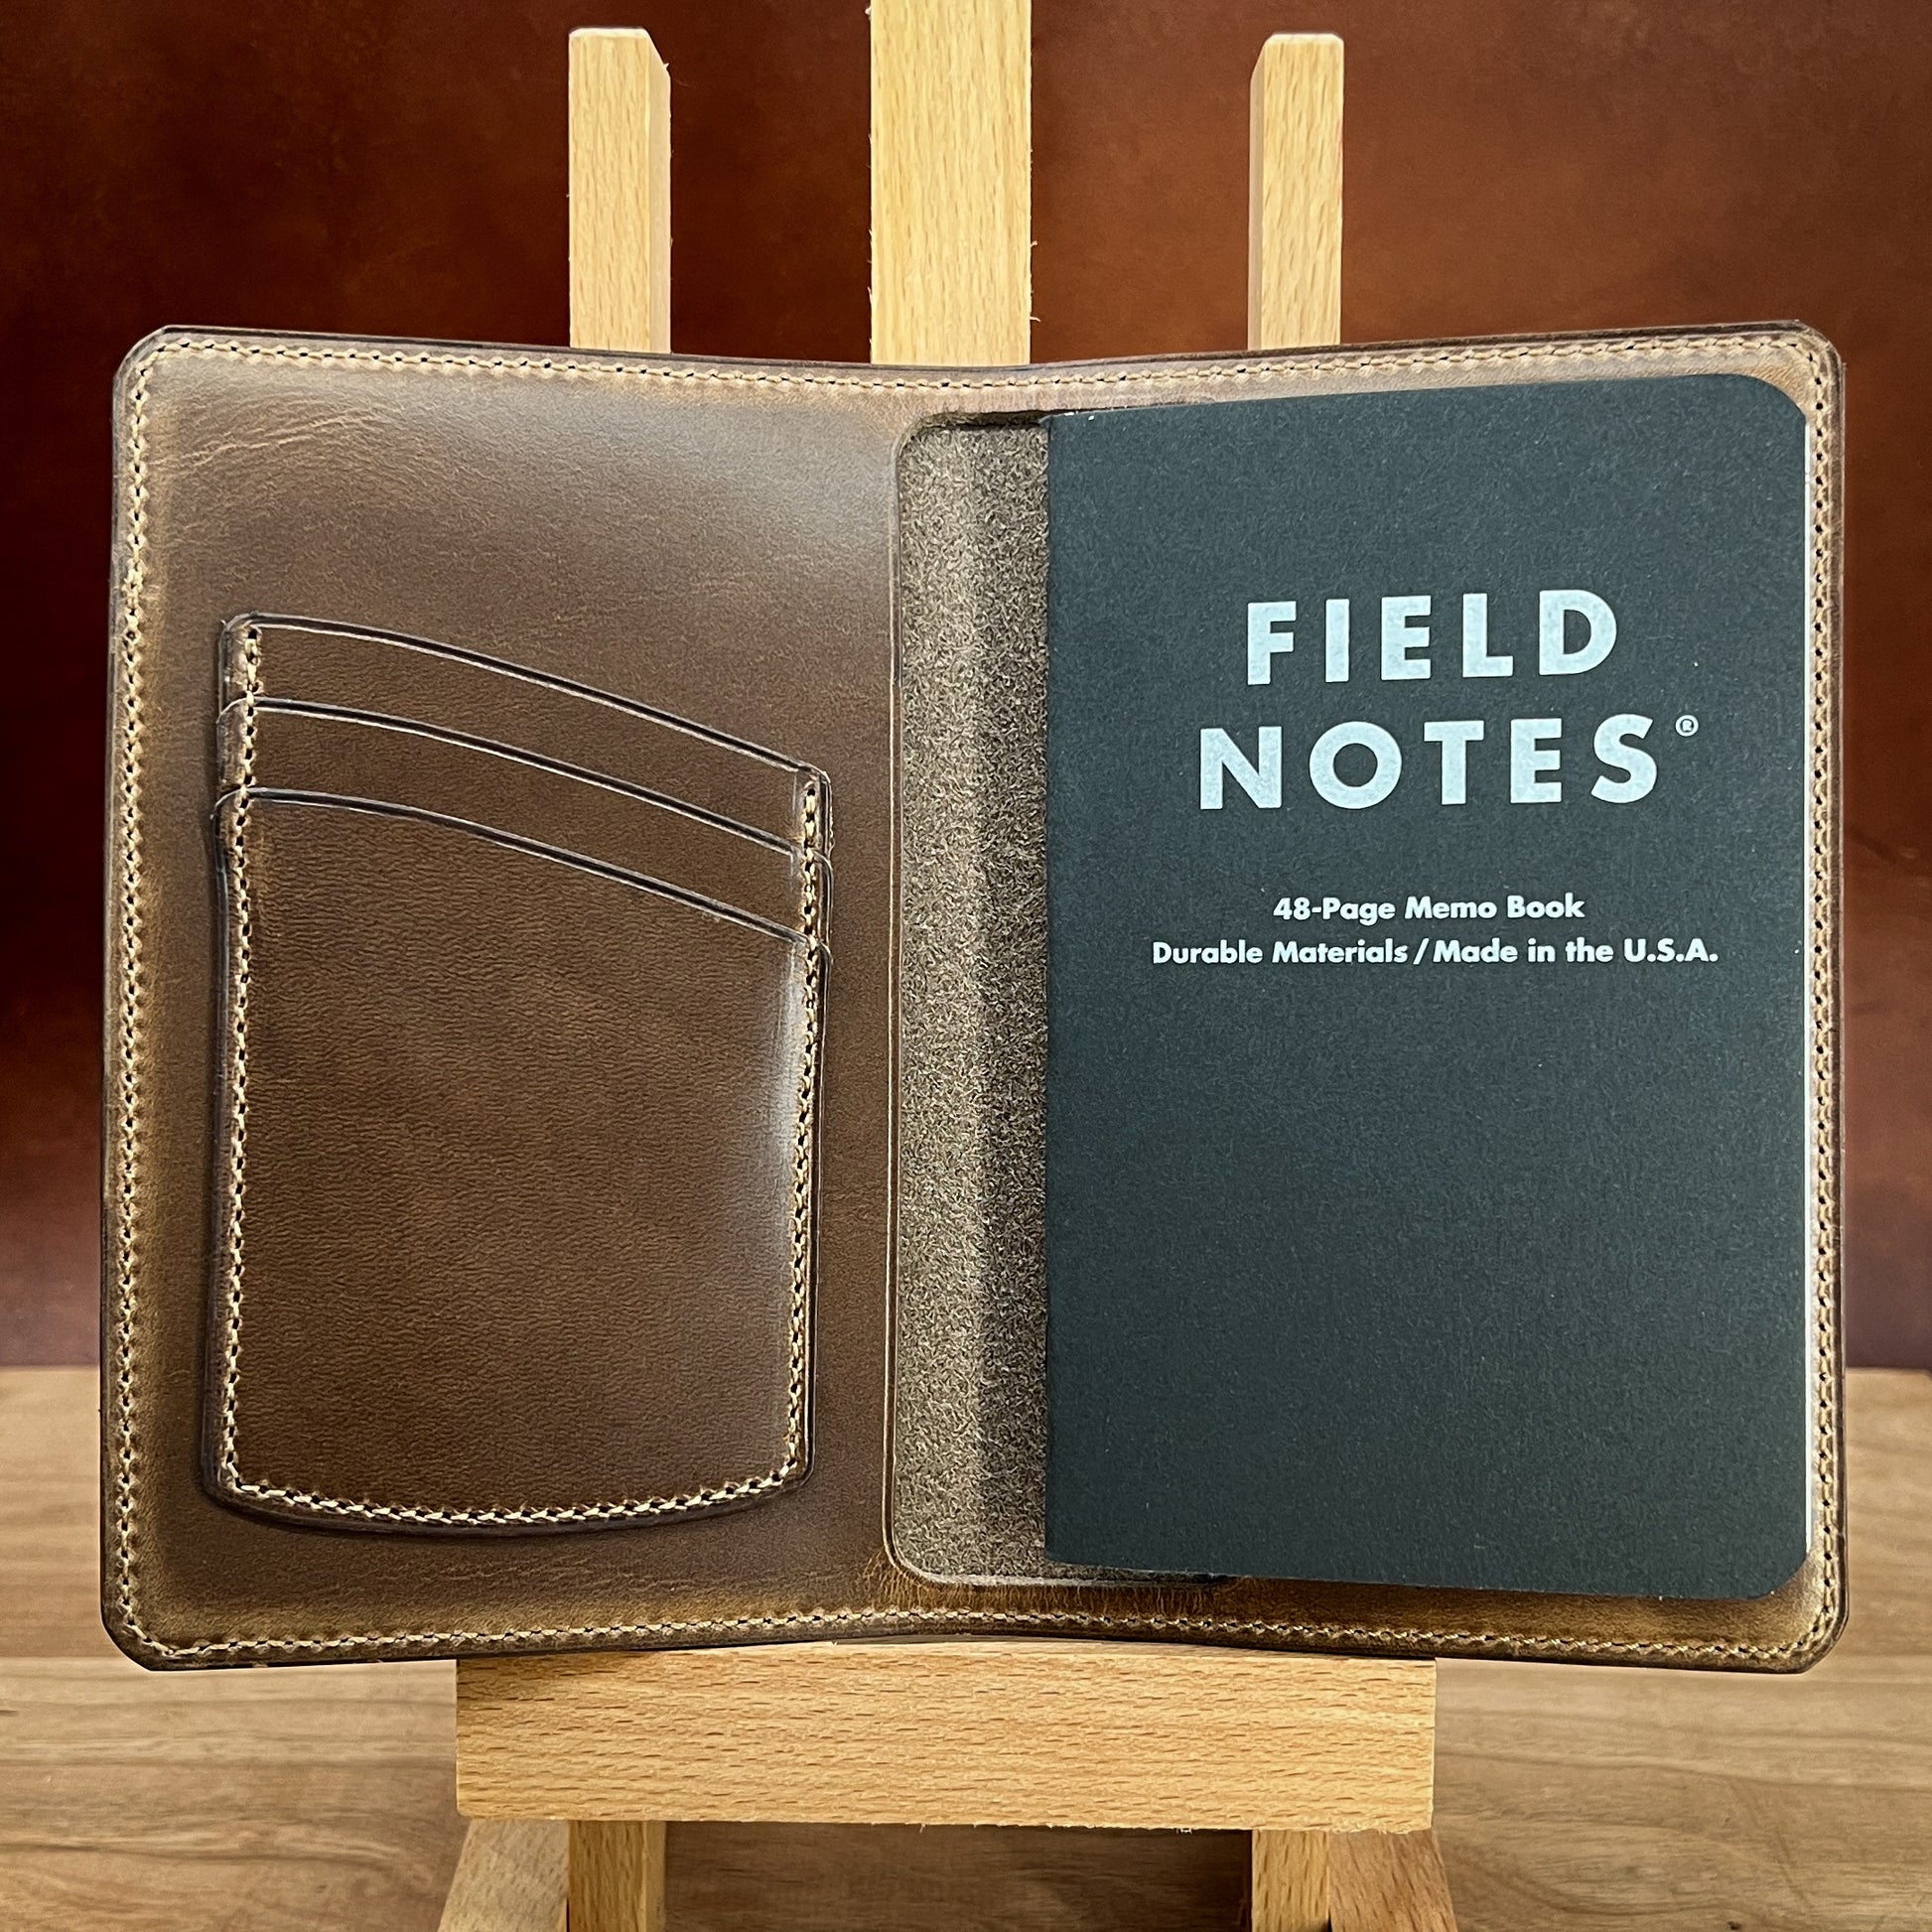 Interior of the Horween Leather Notebook Cover for Pocket Sized Notebooks including Field Notes.  Made with Natural CXL Horween leather. Handmade by Custom Leather and Pen